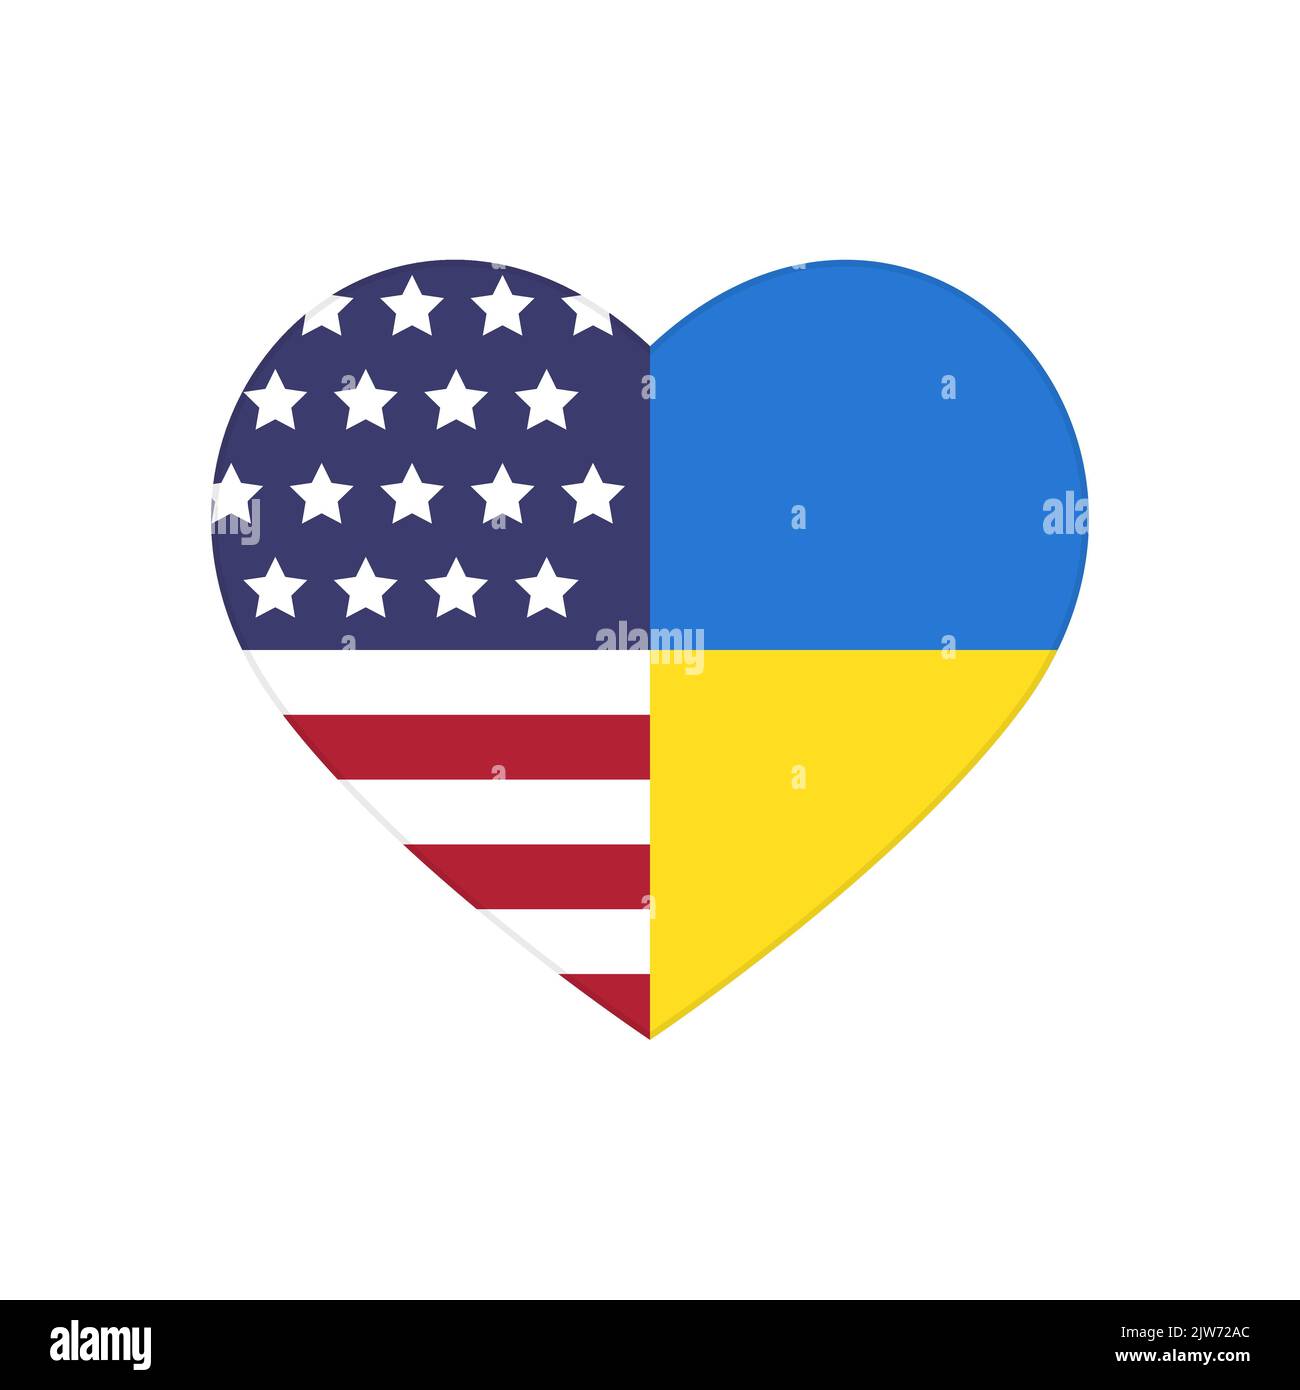 Heart puzzle pieces of Unated States and Ukraine flags. Partnership, friendship and support of american people and government for Ukrainian citizens and army, symbol of love and peace between nations Stock Vector